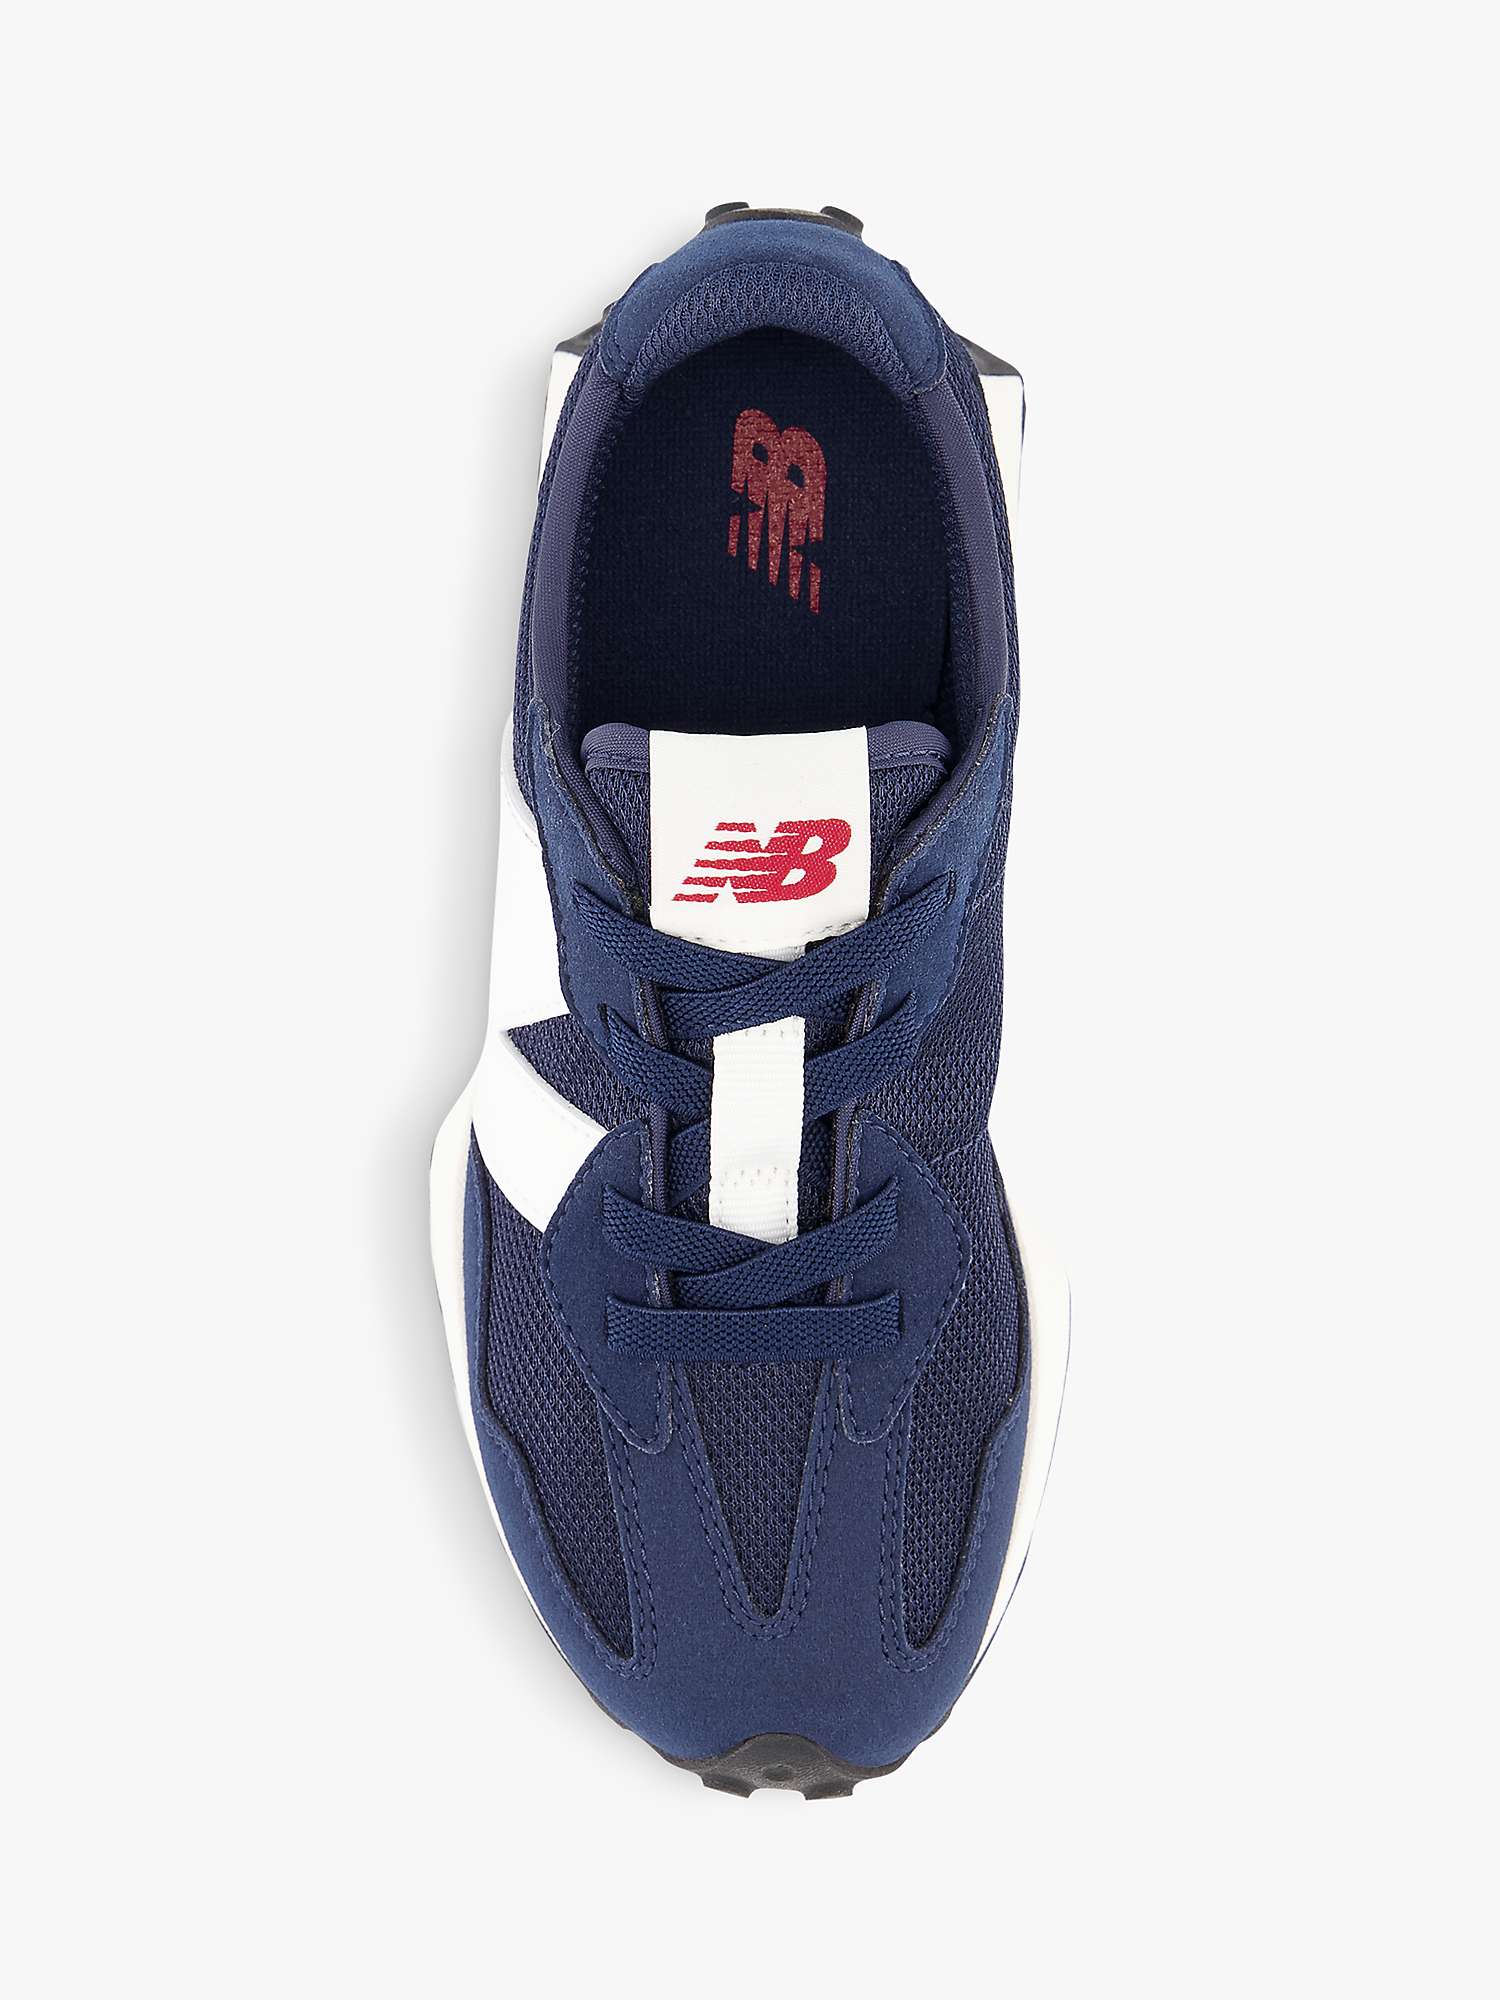 Buy New Balance Kids' 327 Bungee Lace Trainers, Navy Online at johnlewis.com